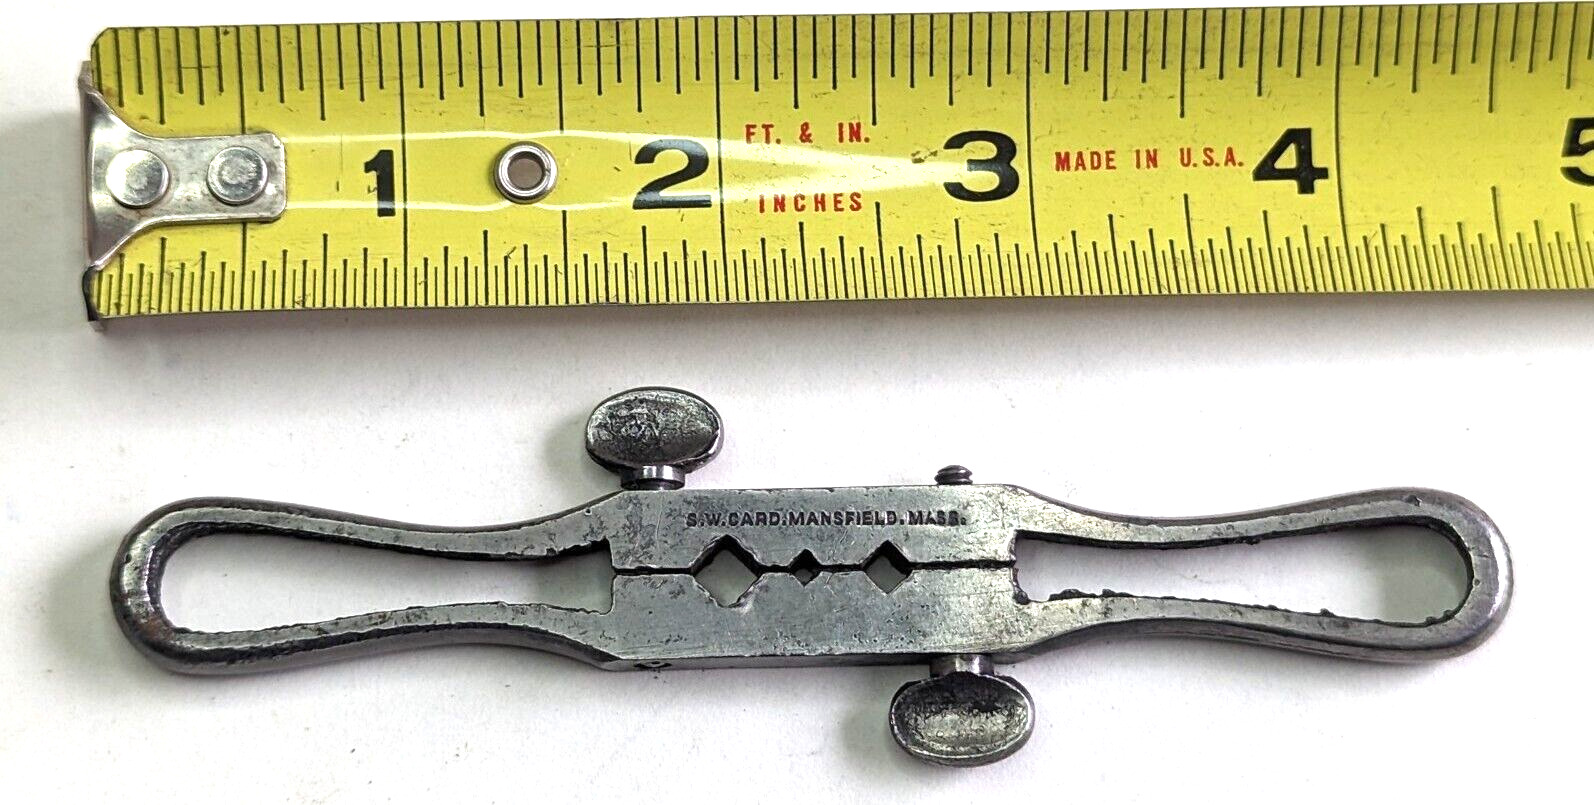 Vintage small tiny Tap Handle Wrench S.W.CARD MANSFIELD,MASS USA 